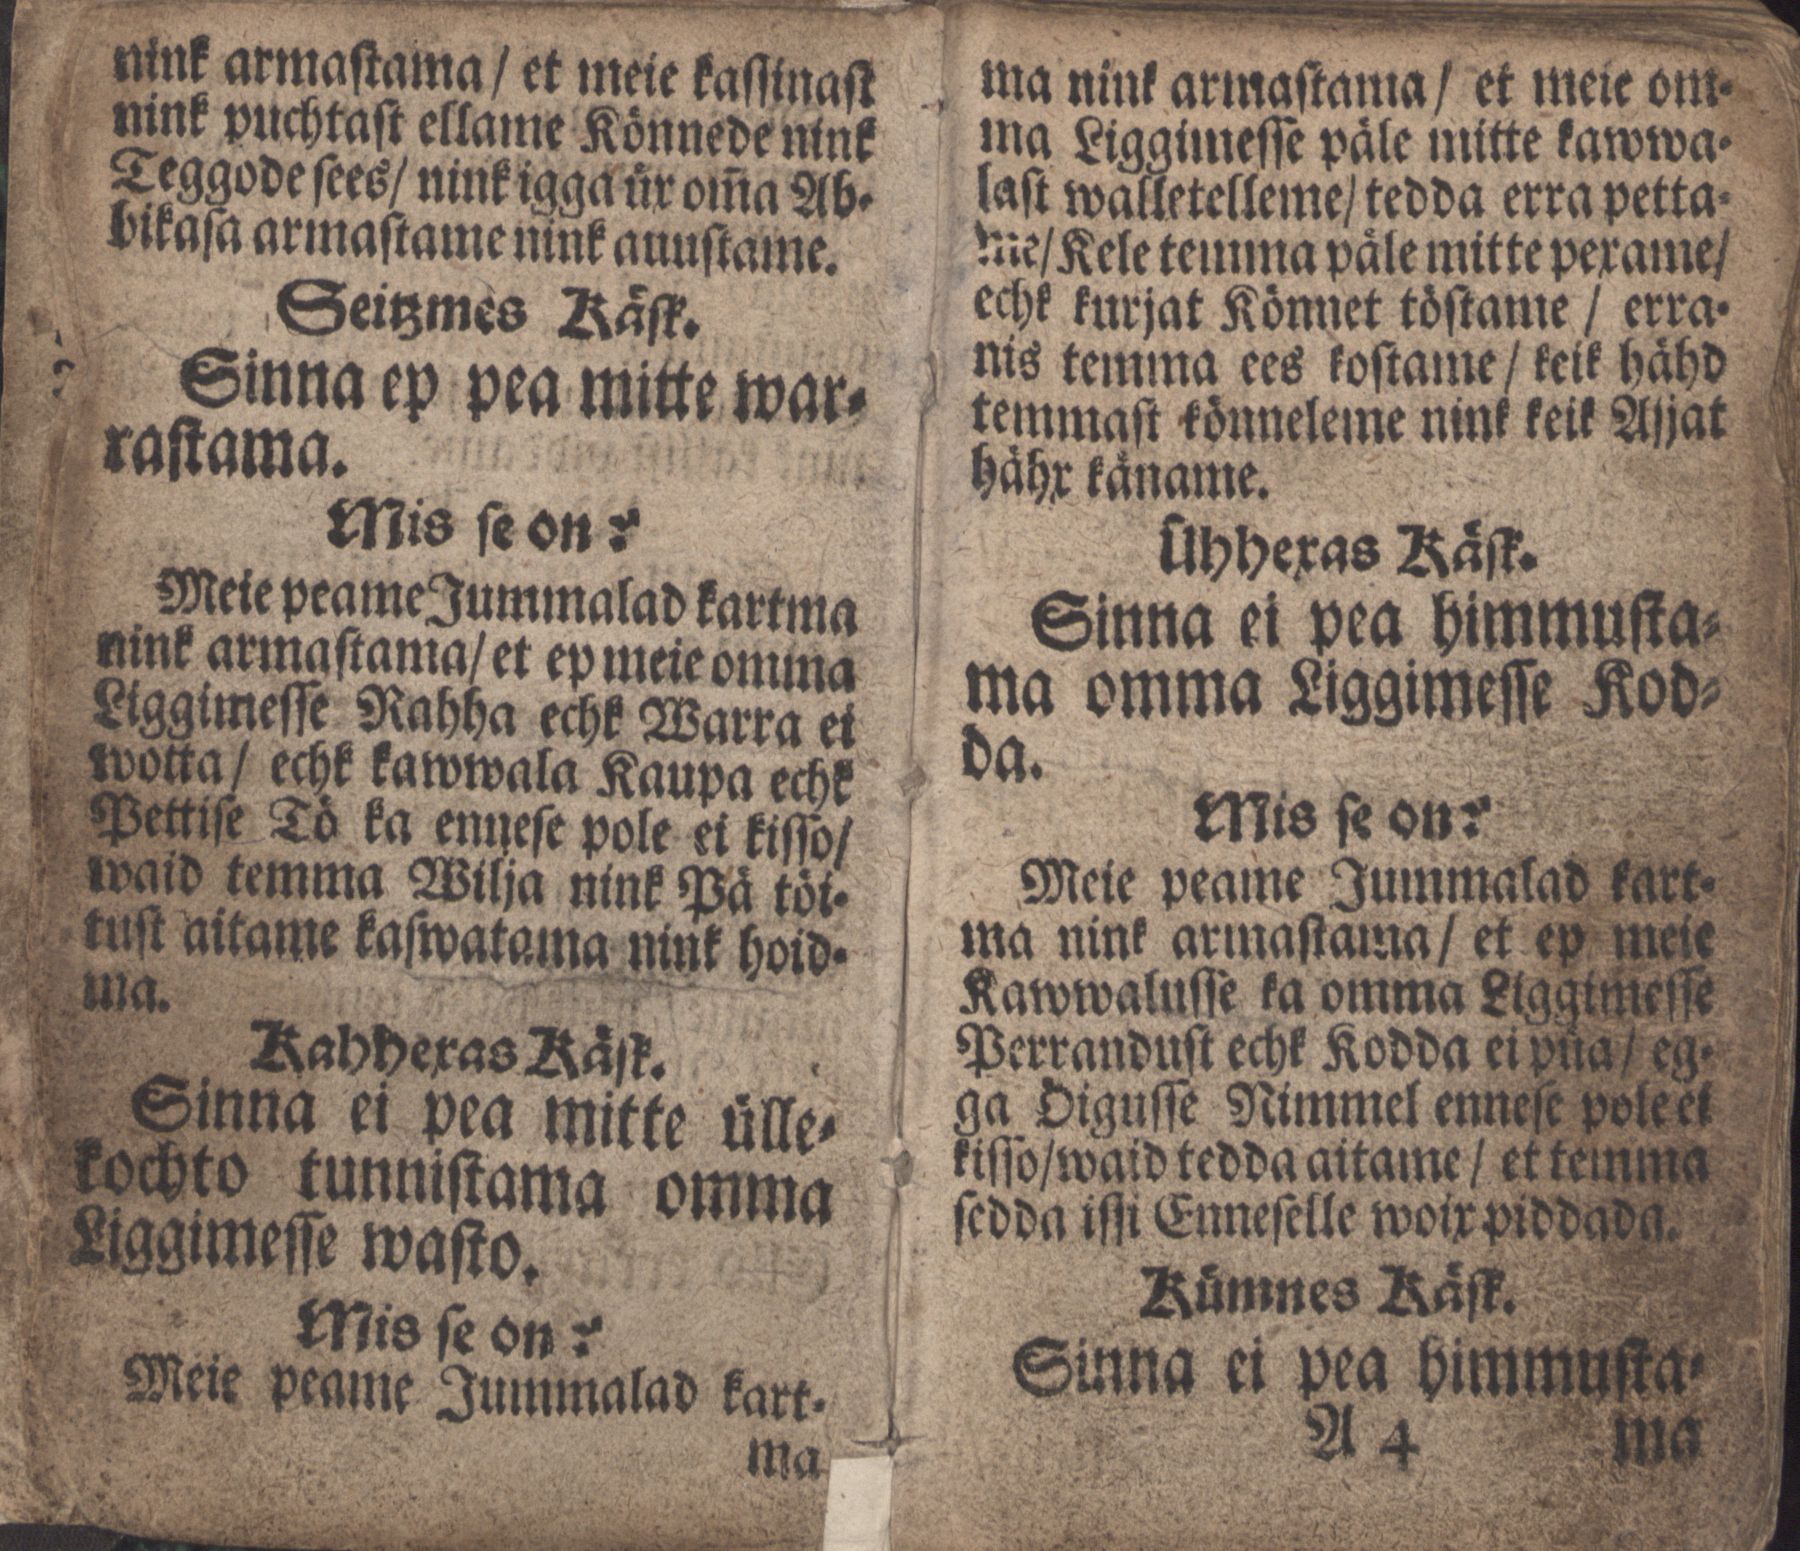 D. Mart. Lutterusse Katechismus (1700) | 4. Main body of text